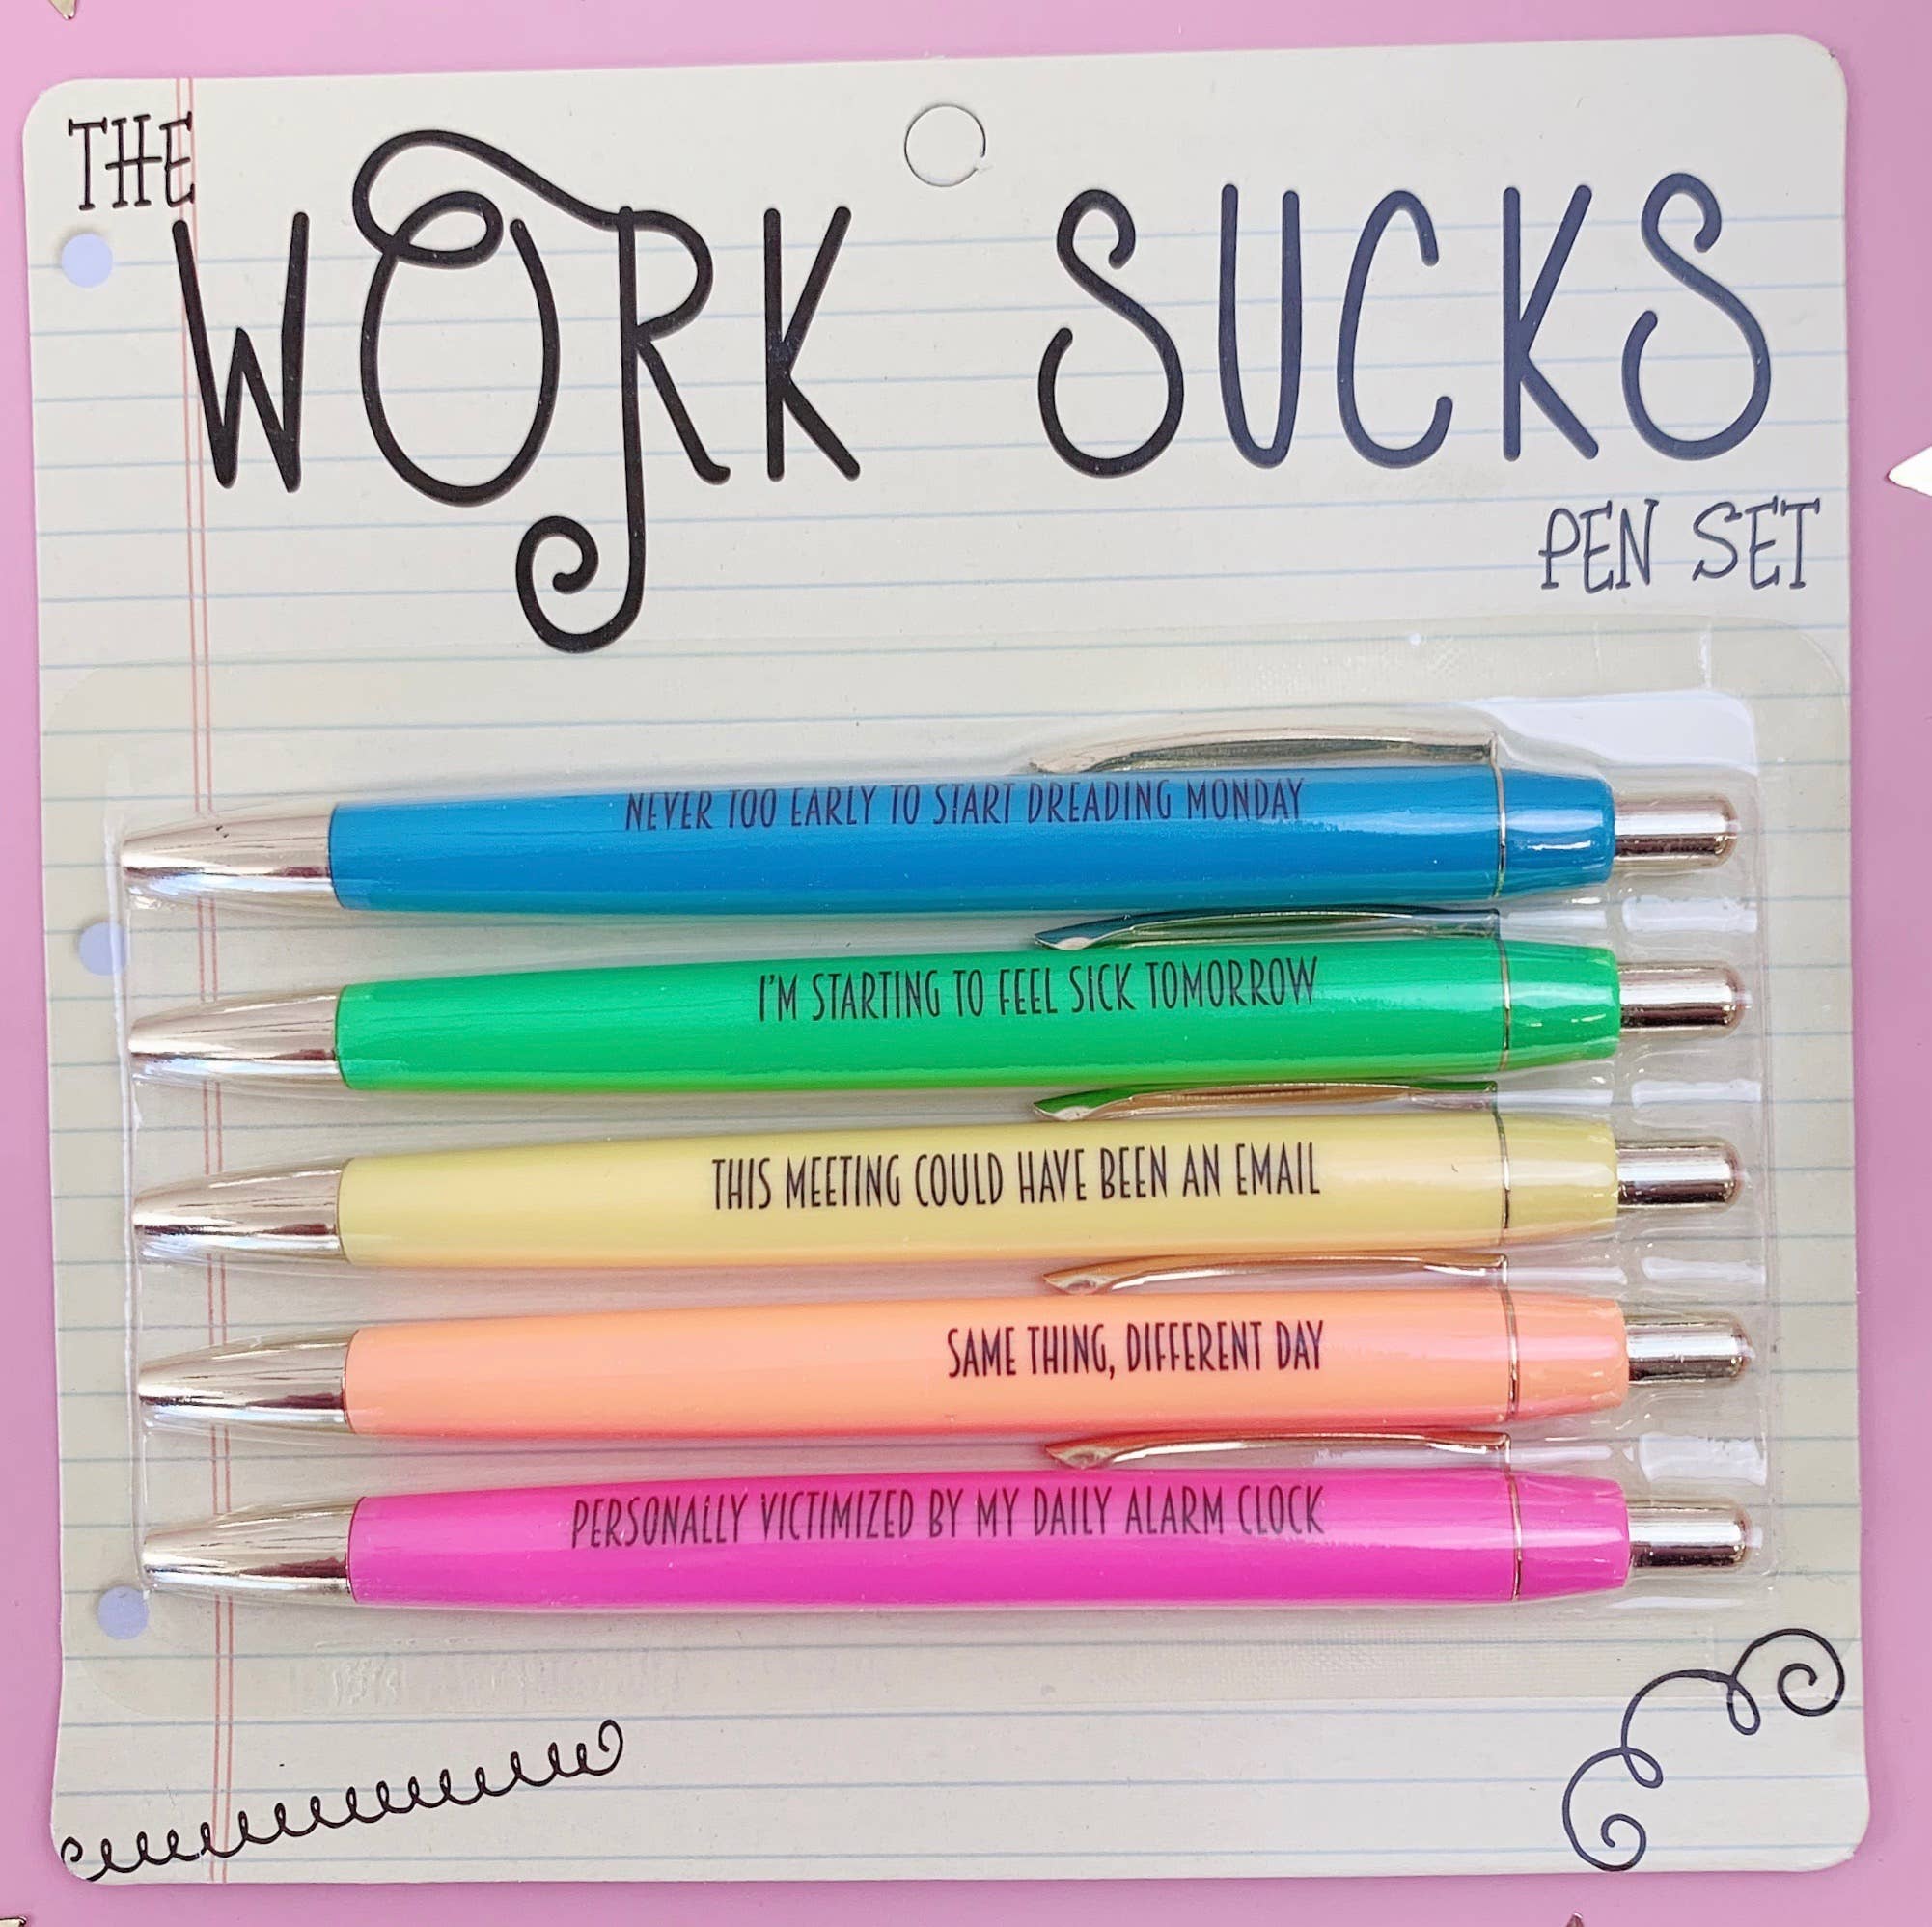 Fun Club, Office, New Funny Demotivational Pen Set Fun Silly Gift